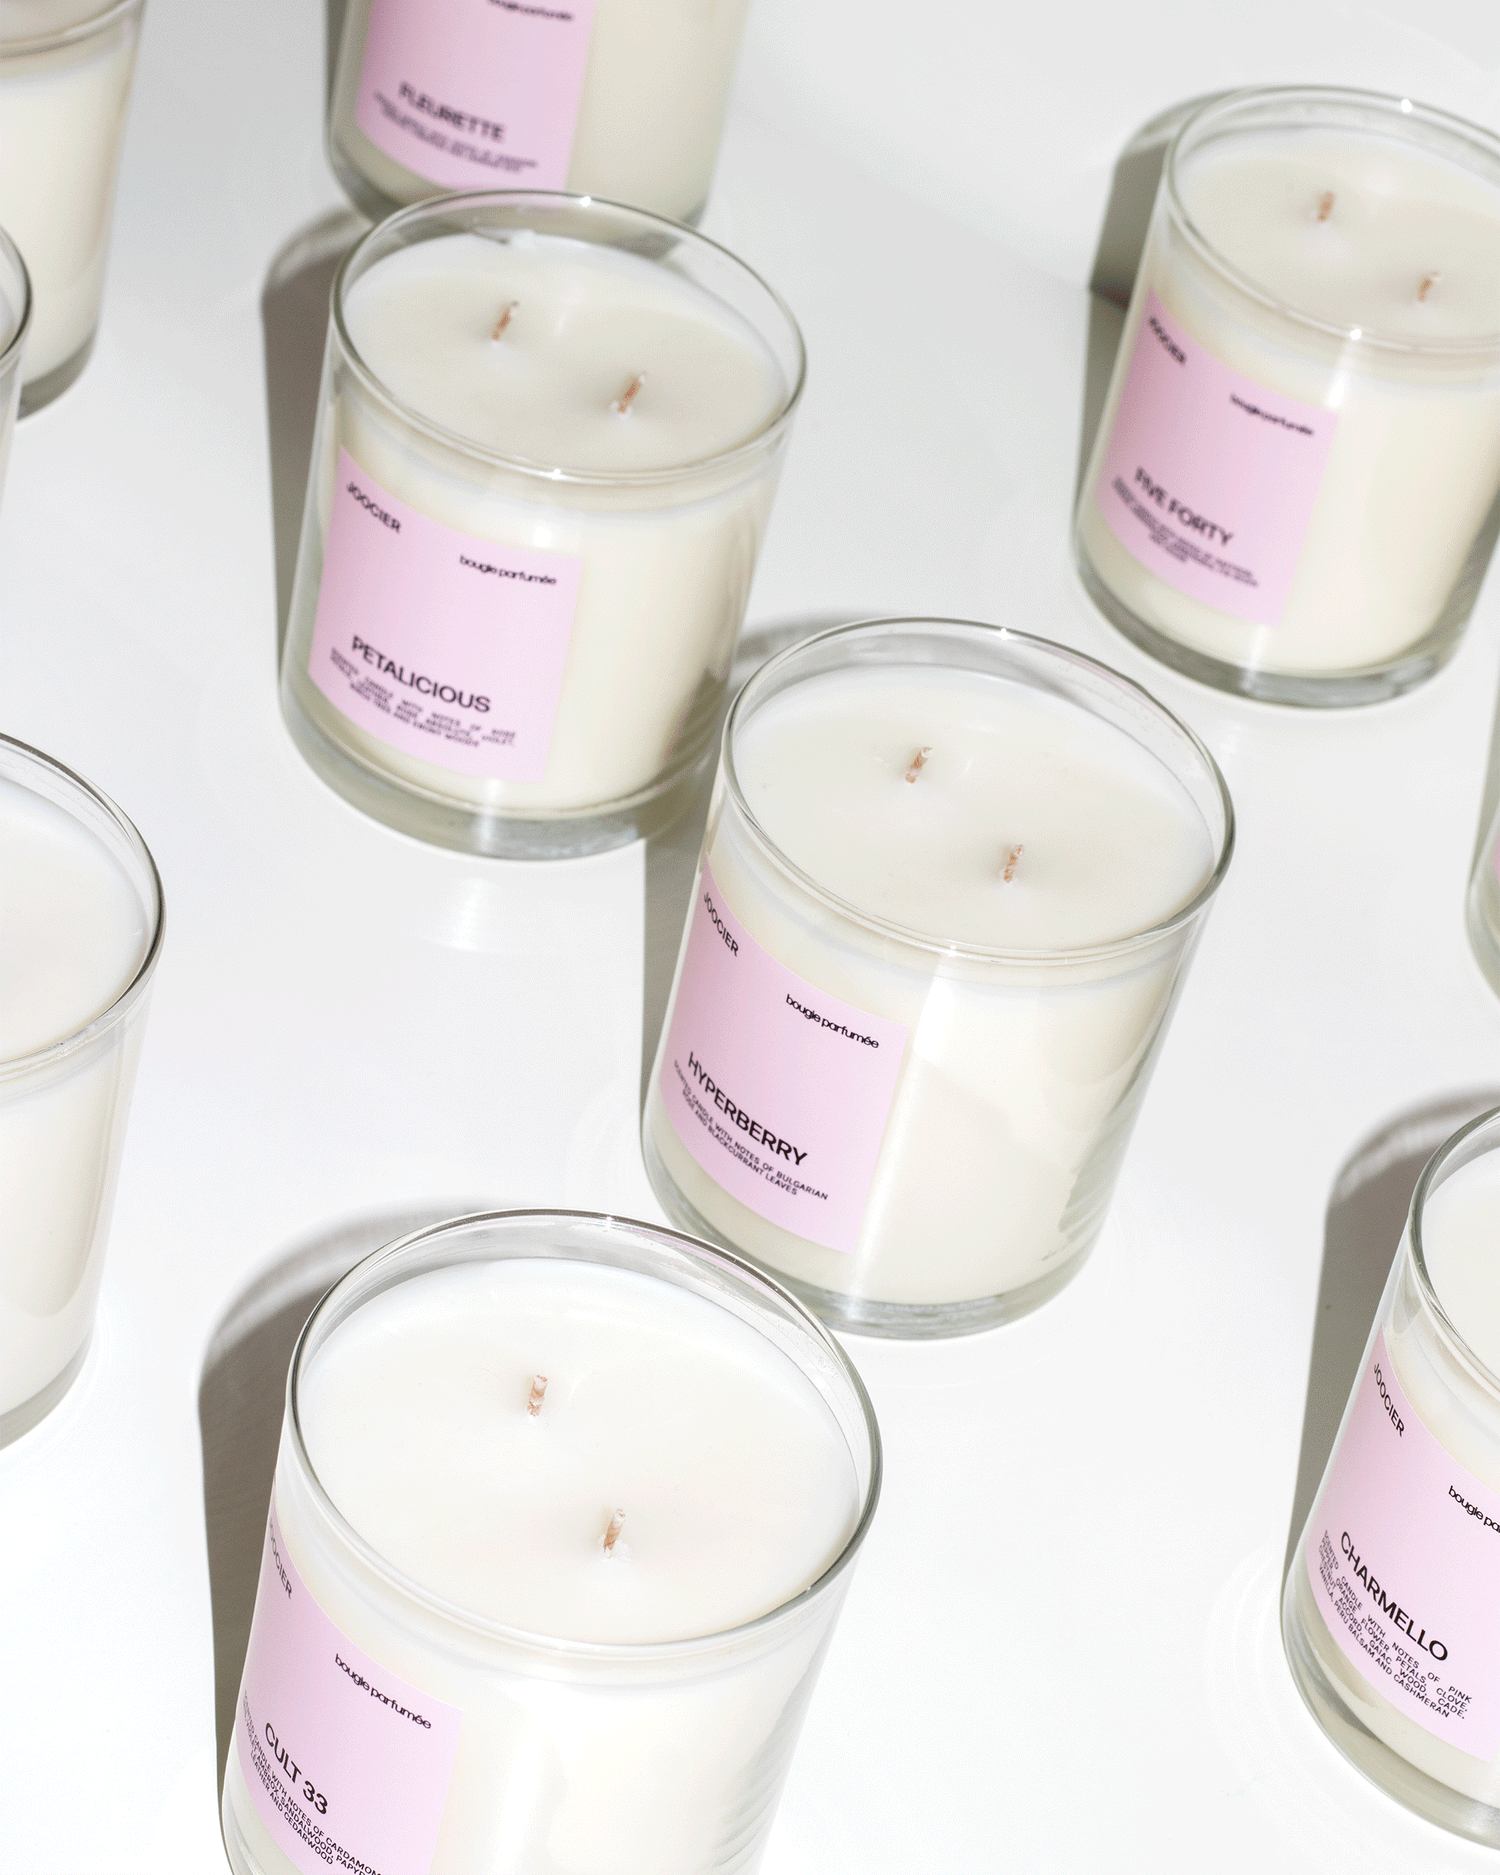 Candles inspired by luxury fragrances like Byredo, Baccarat Rouge 540, Tom Ford, Gucci, Le Labo Santal 33 and more